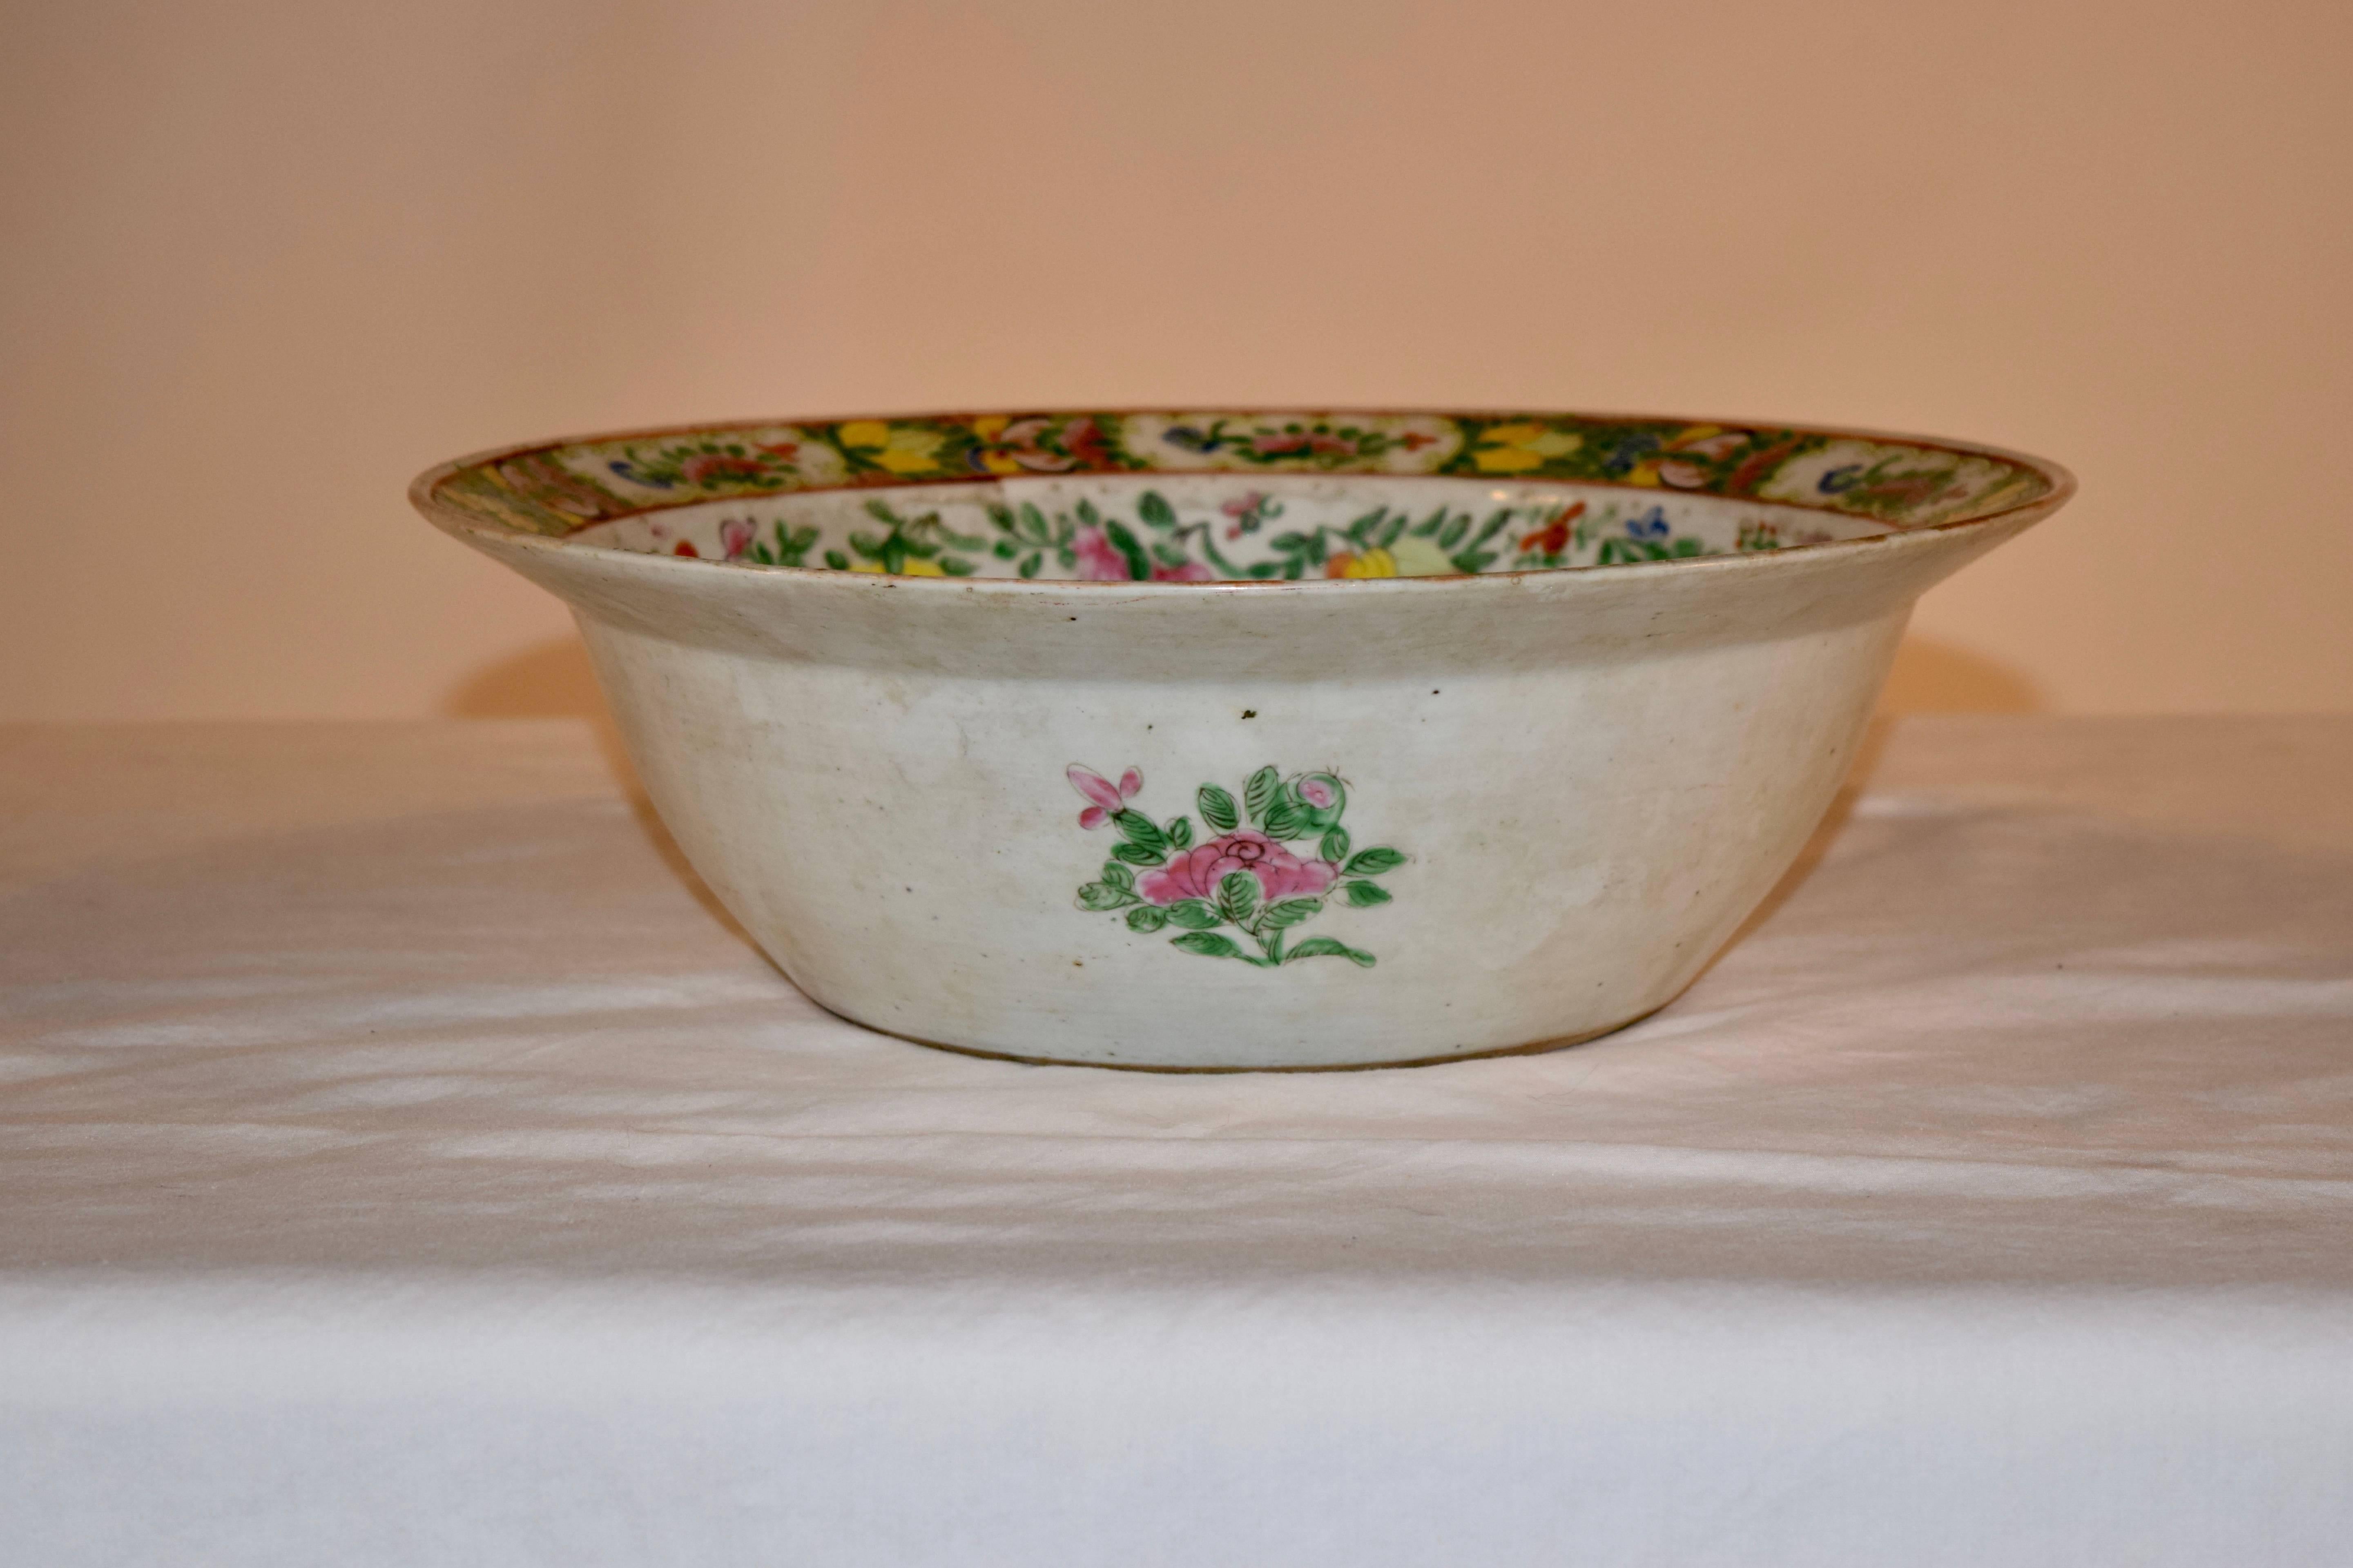 19th century hand-painted export bowl with wonderful vibrant colors in patterns of florals, birds and butterflies.